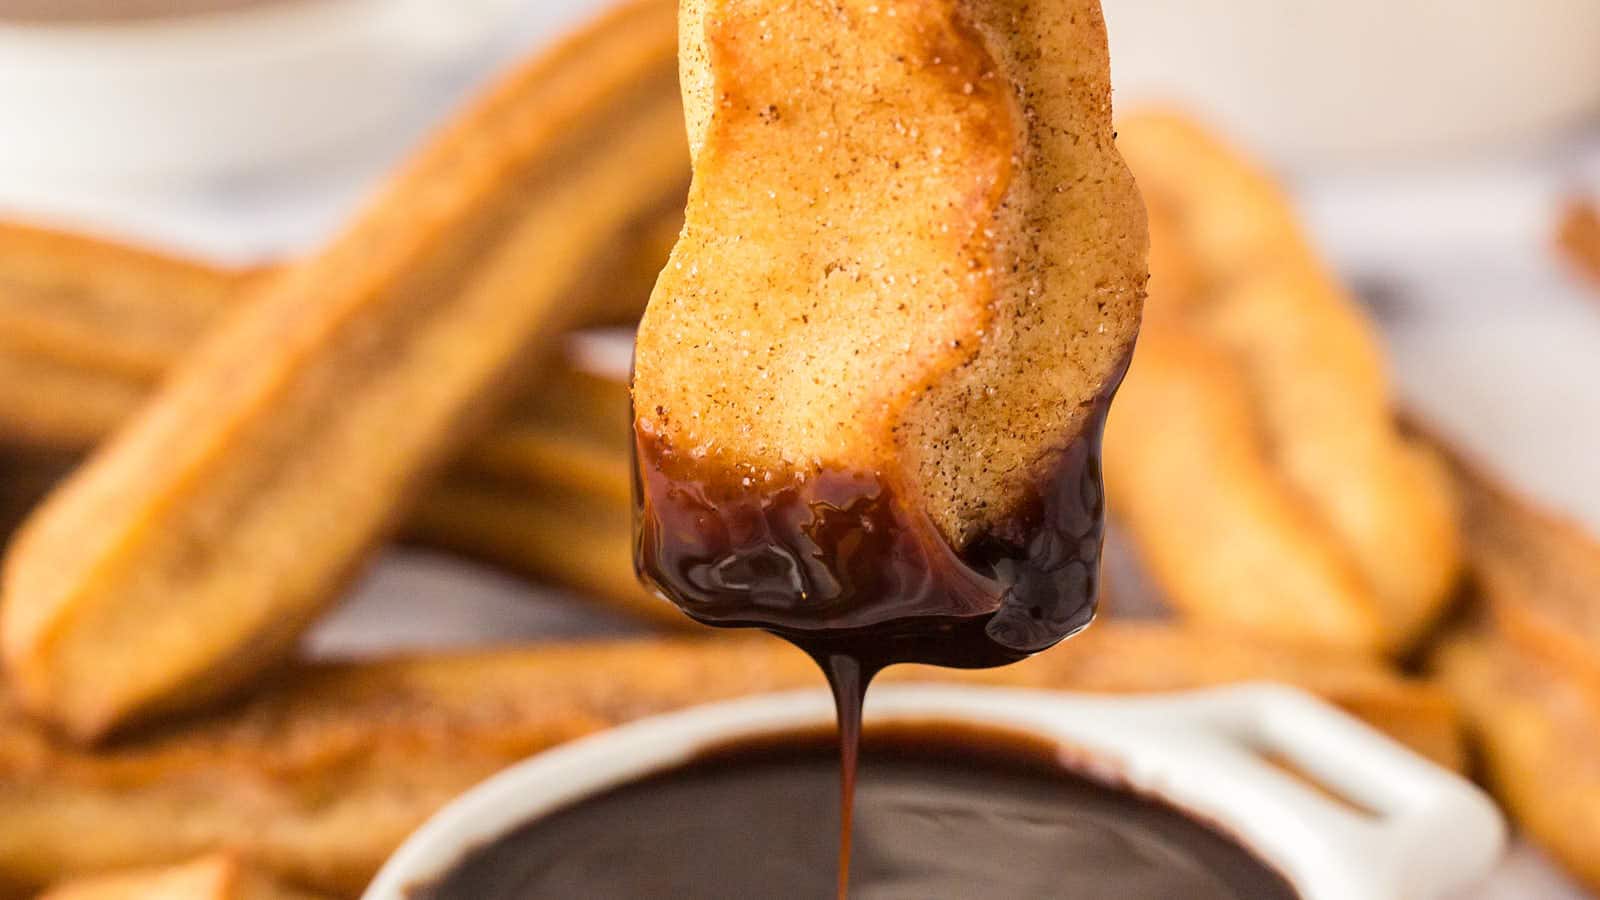 Baked Churros recipe by Cheerful Cook.